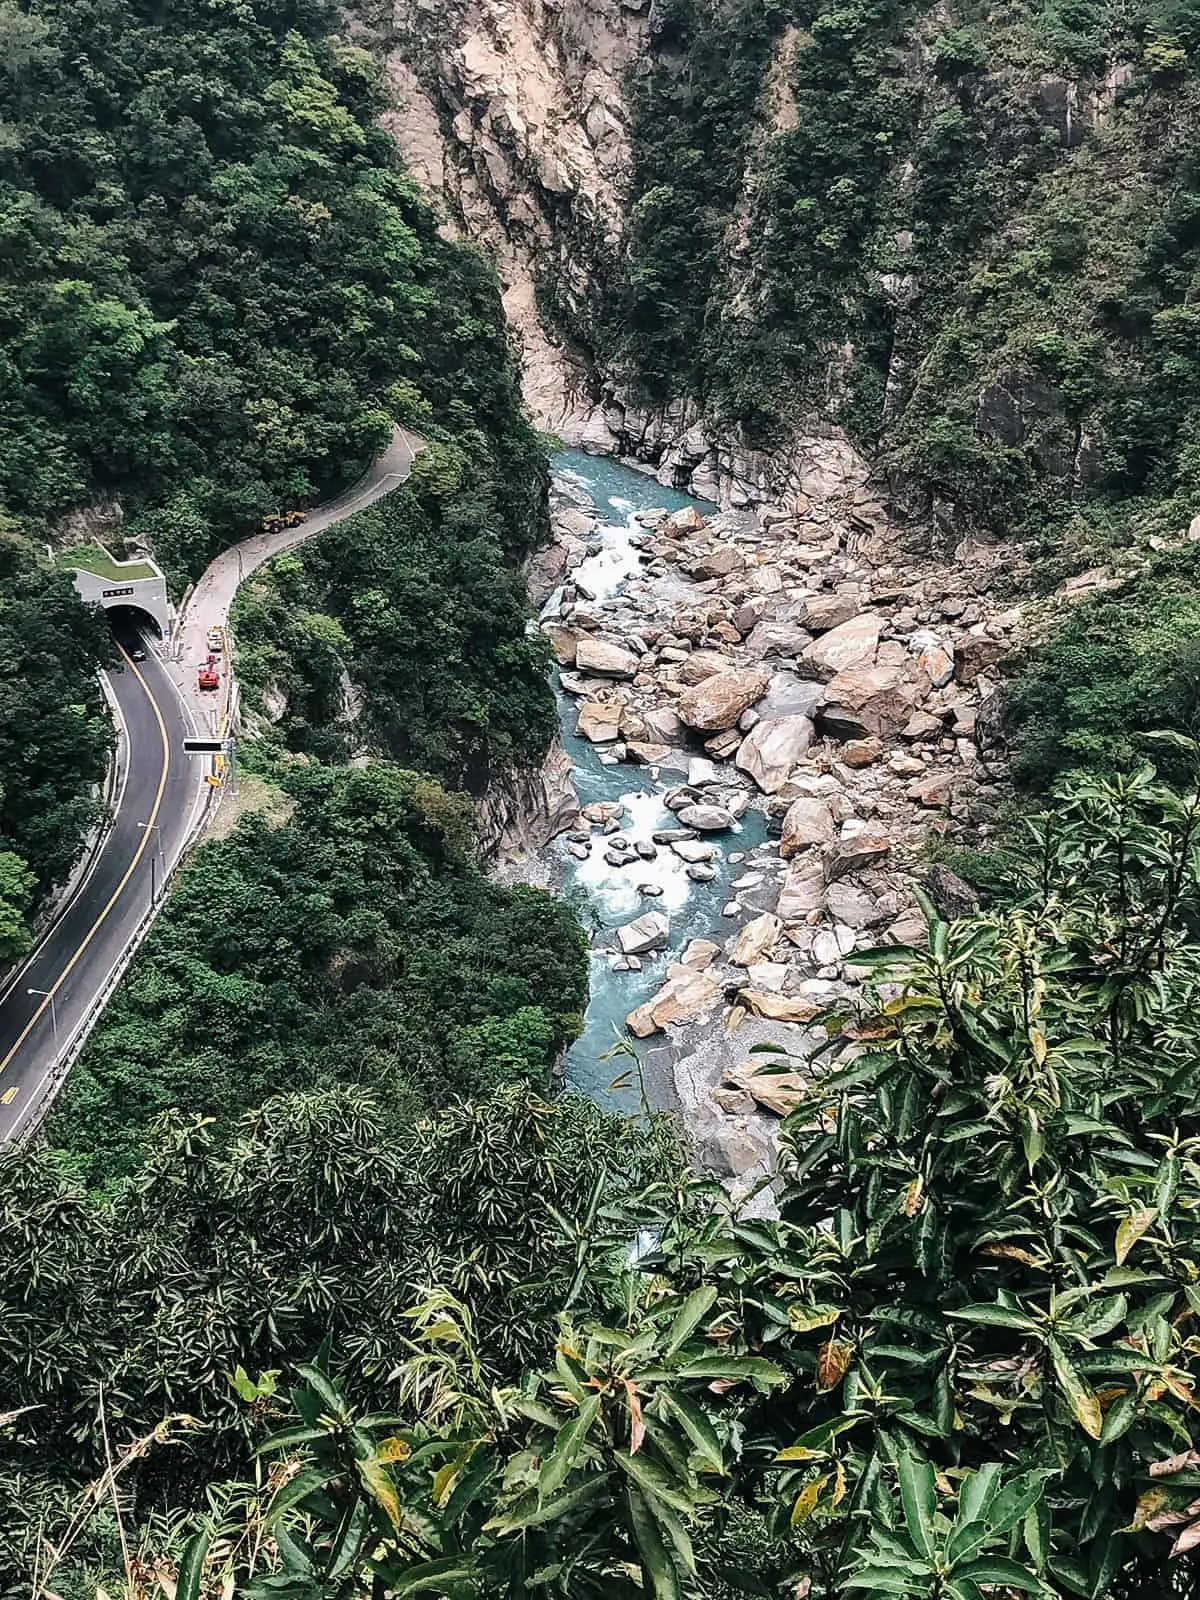 View of the river at Taroko National Park in Hualien, Taiwan